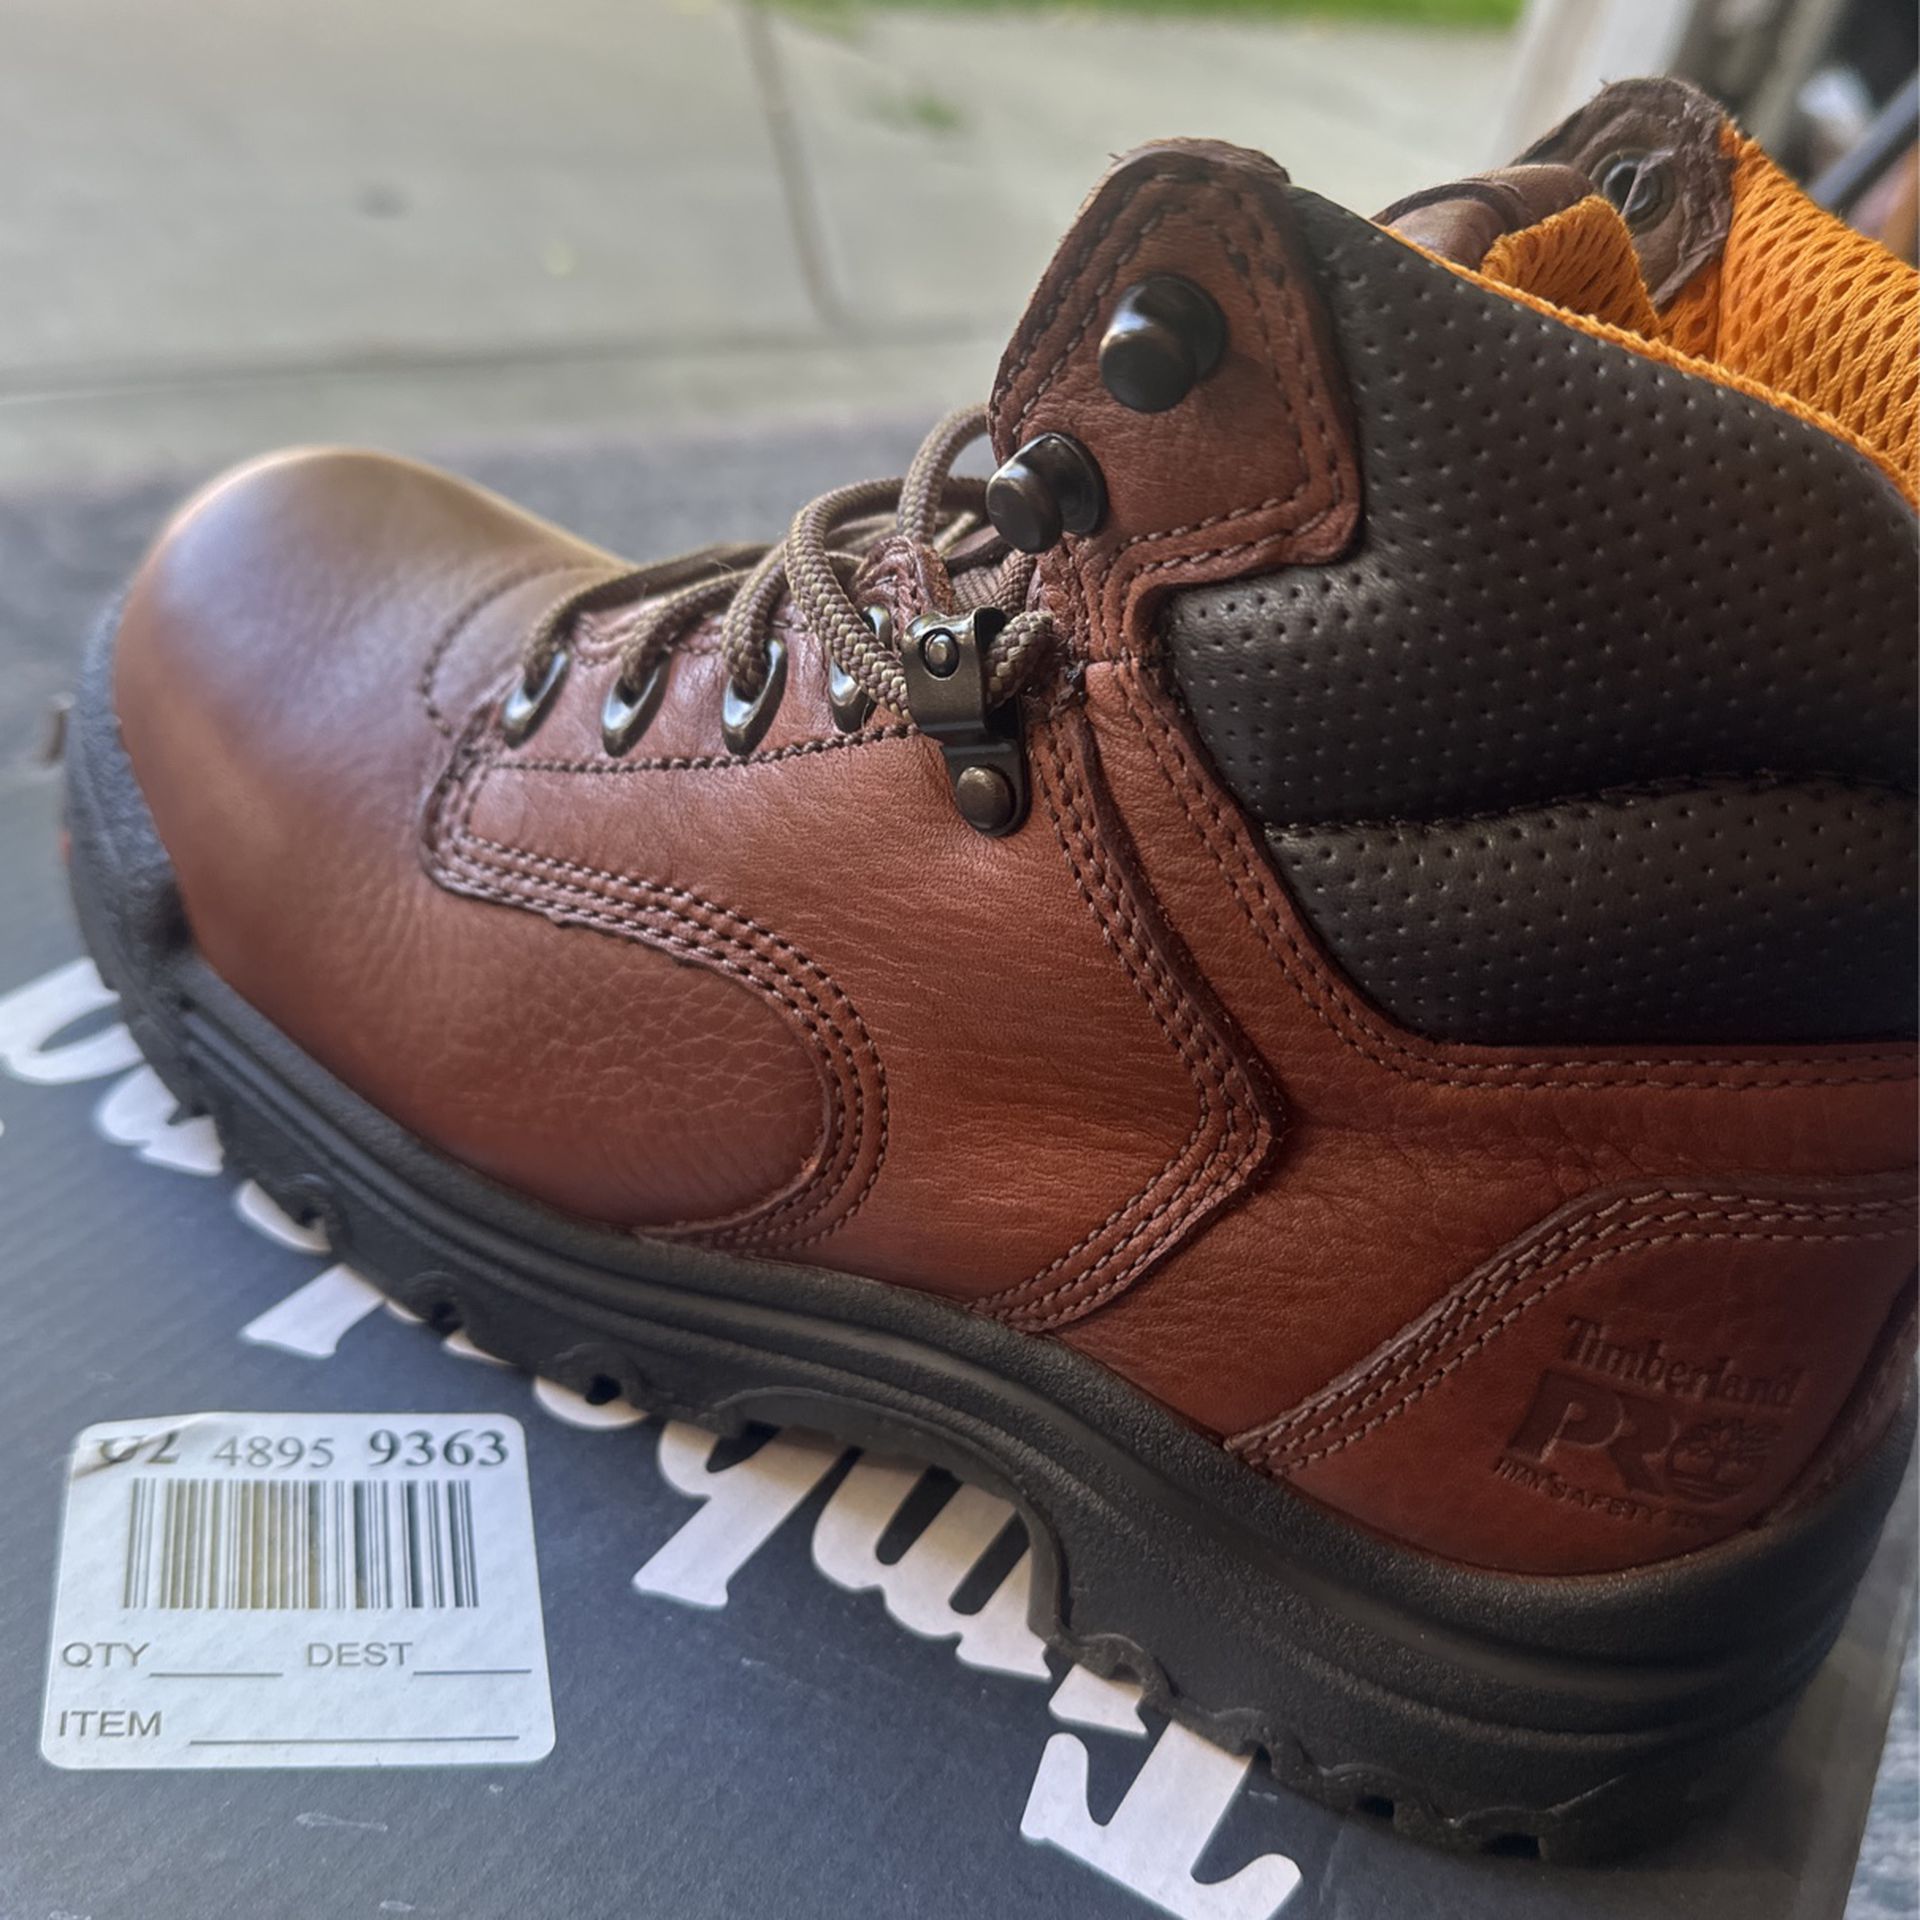 Timberland Alloy Safety Toe Work Boots $75